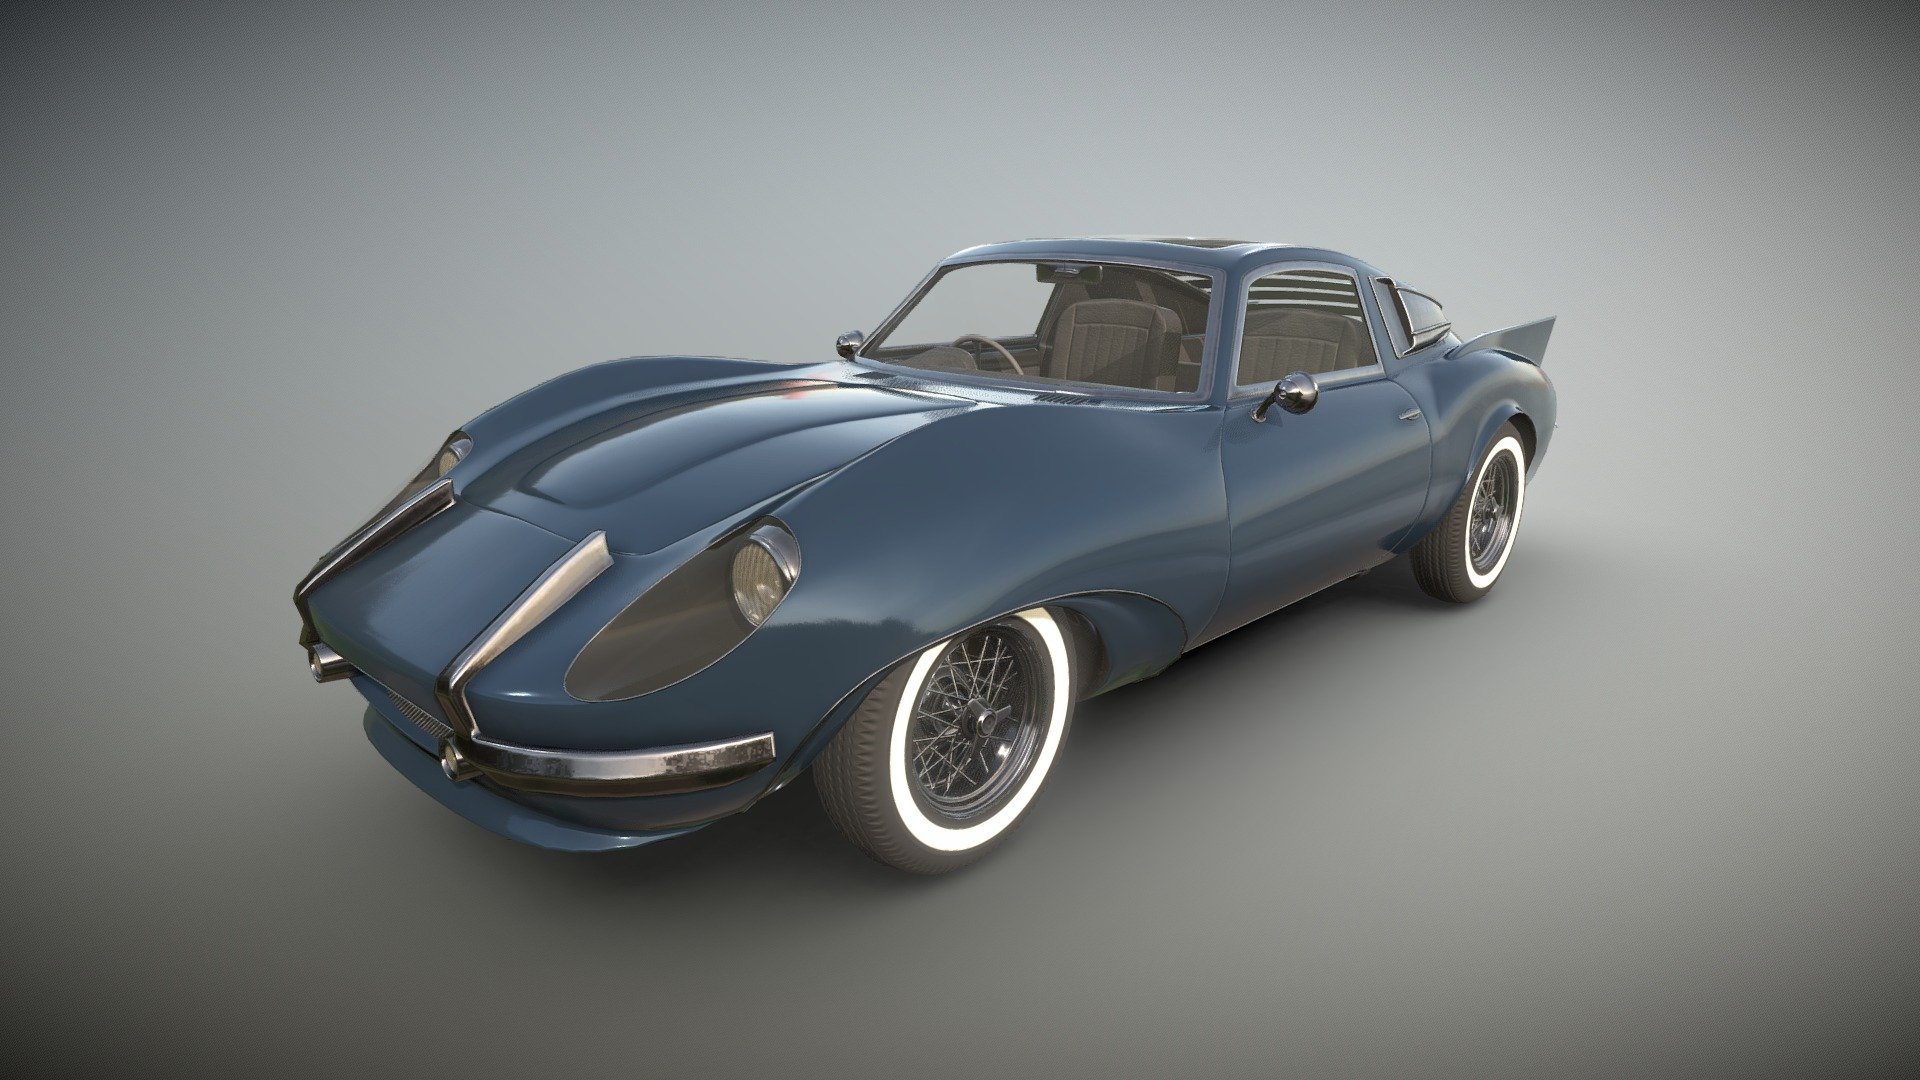 The Excelsior sports car is of Atom-Punk inspiration with a blend of design charecteristics of iconic sports cars from the 60's incorporating both class &amp; style, the Excelsior will not only impress but will also perform when put to the test.

This model has been created using a high-low poly construction method &amp; comes with a PBR Metallic / Roughness texture set. 

Originally created for modding purposes.

Doors are fully modelled &amp; do open

(The Engine in this model is for showcase purposes only and not intendid for game usage as it is 32k tri’s on its own)

See more of my artwork on my ArtStation:

(custom color combinations can be made on request)

https://www.artstation.com/edgeuk90

Notice: Incorrect download / ripping of this content will result in a DMCA being filed against you 3d model